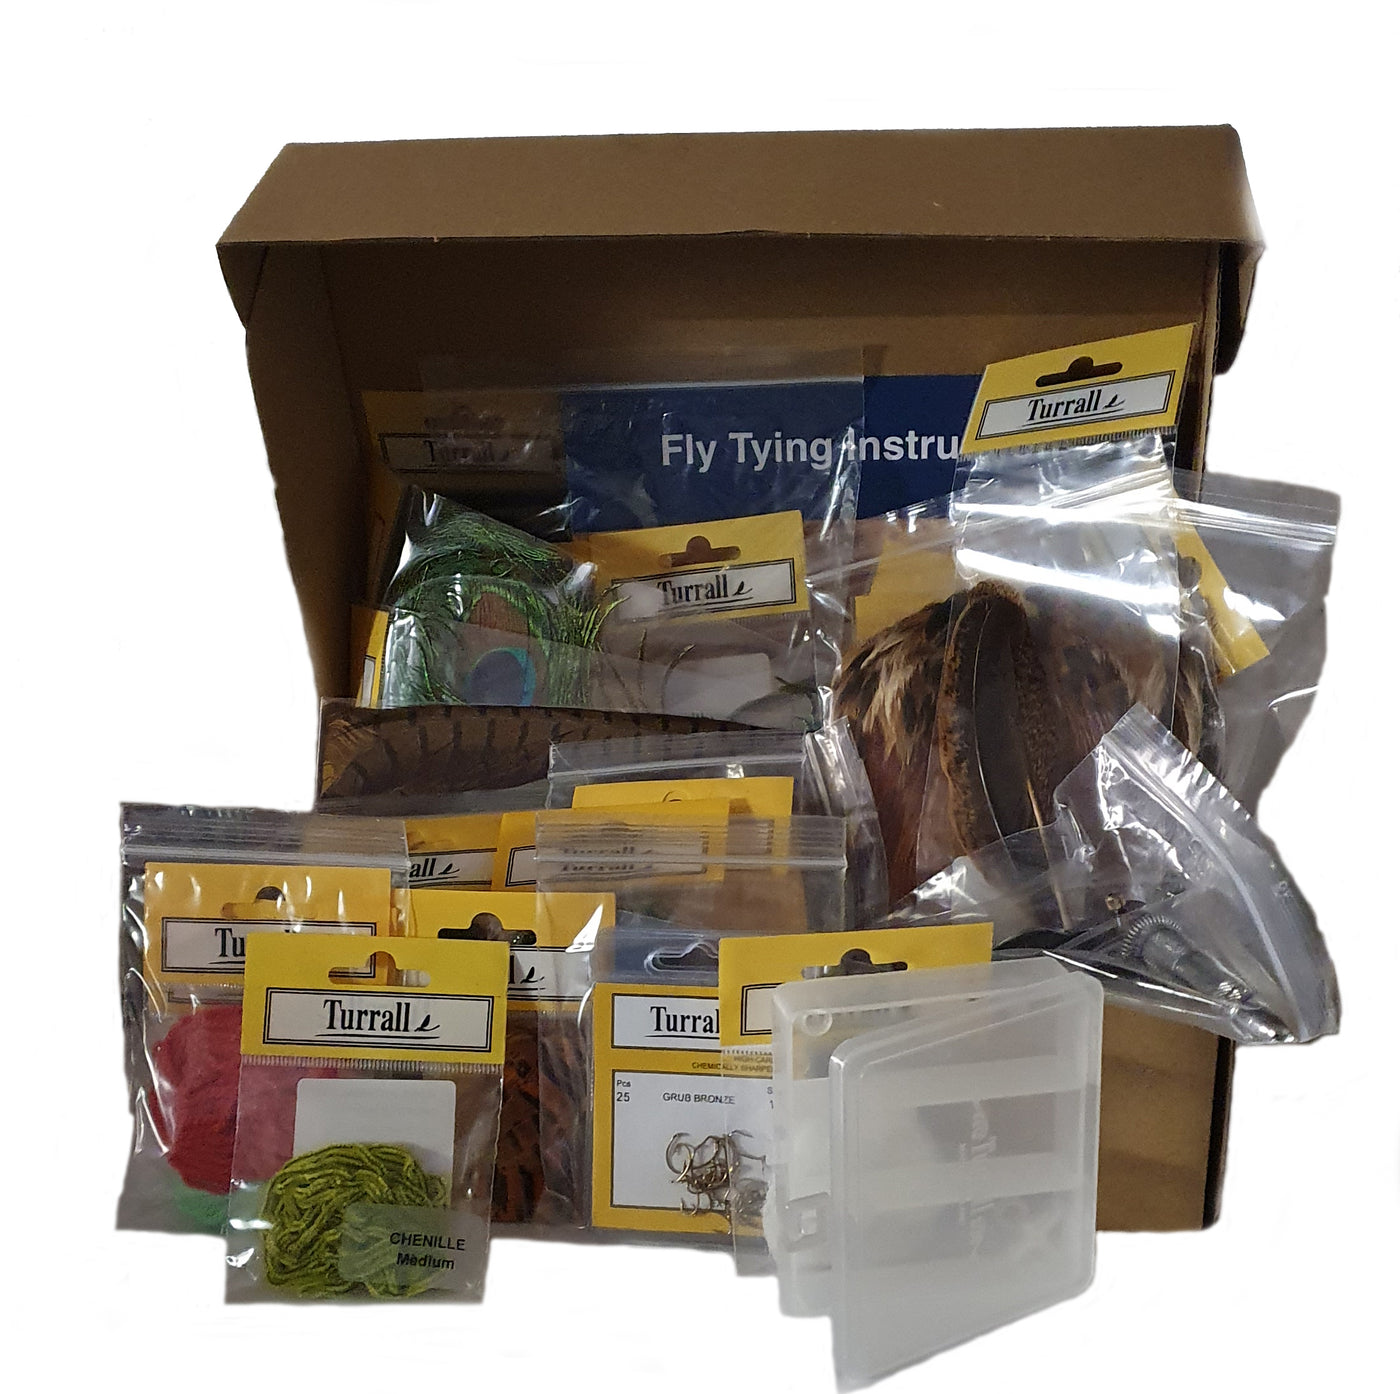 TURRALL PREMIER FLY TYING KIT (BOX) – H Turrall & Co Ltd